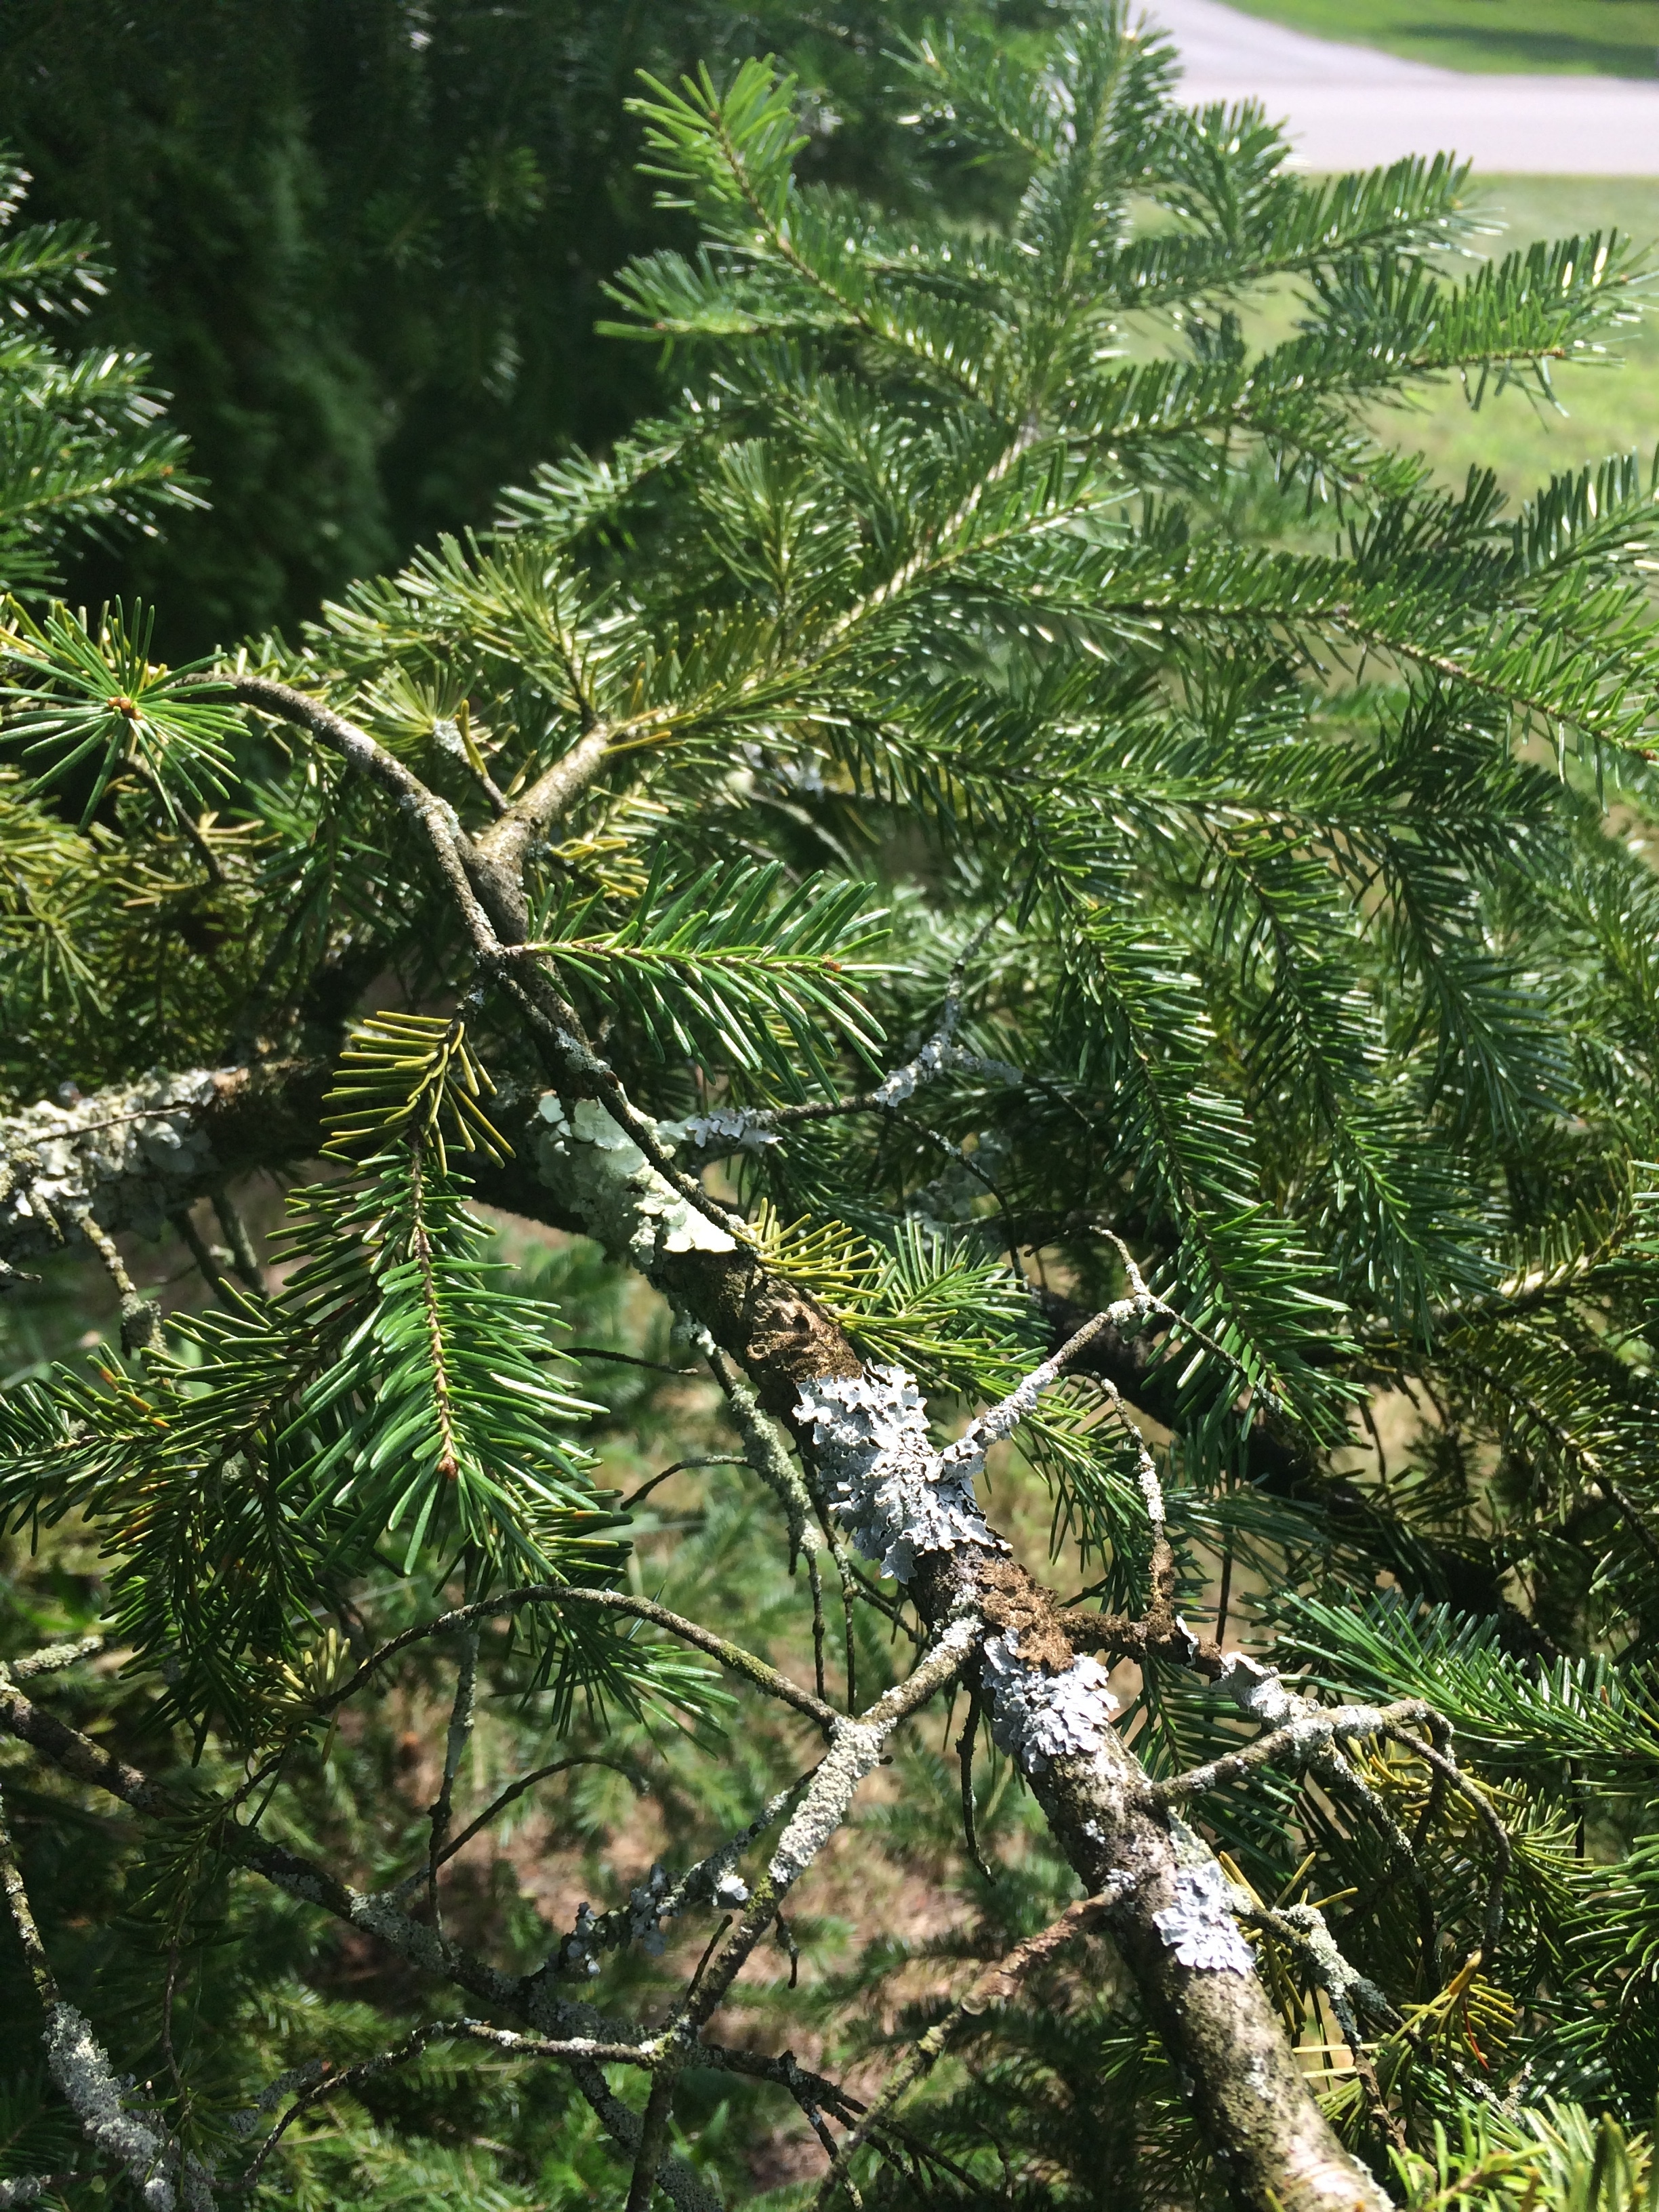 Strange growth on pine tree branches - Ask an Expert